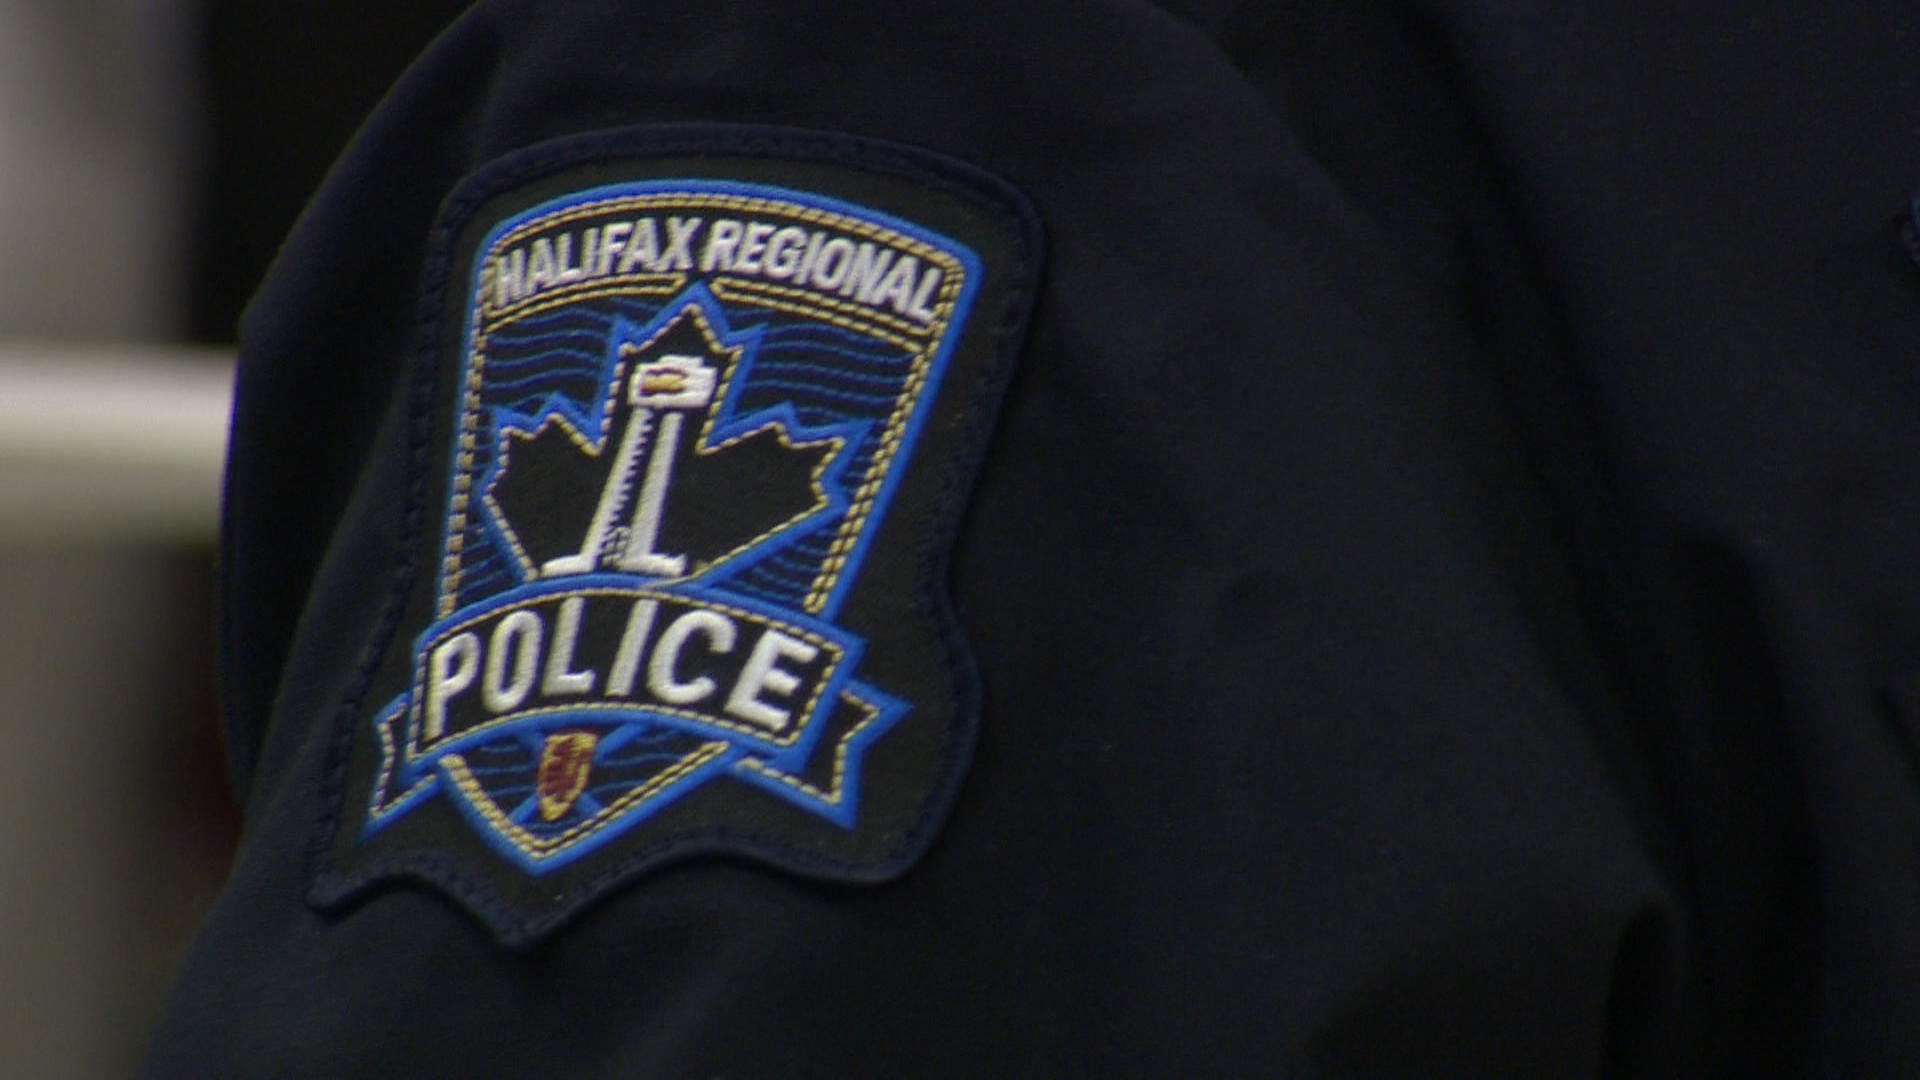 Human remains discovered in Purcells Cove Road area of Halifax, police say